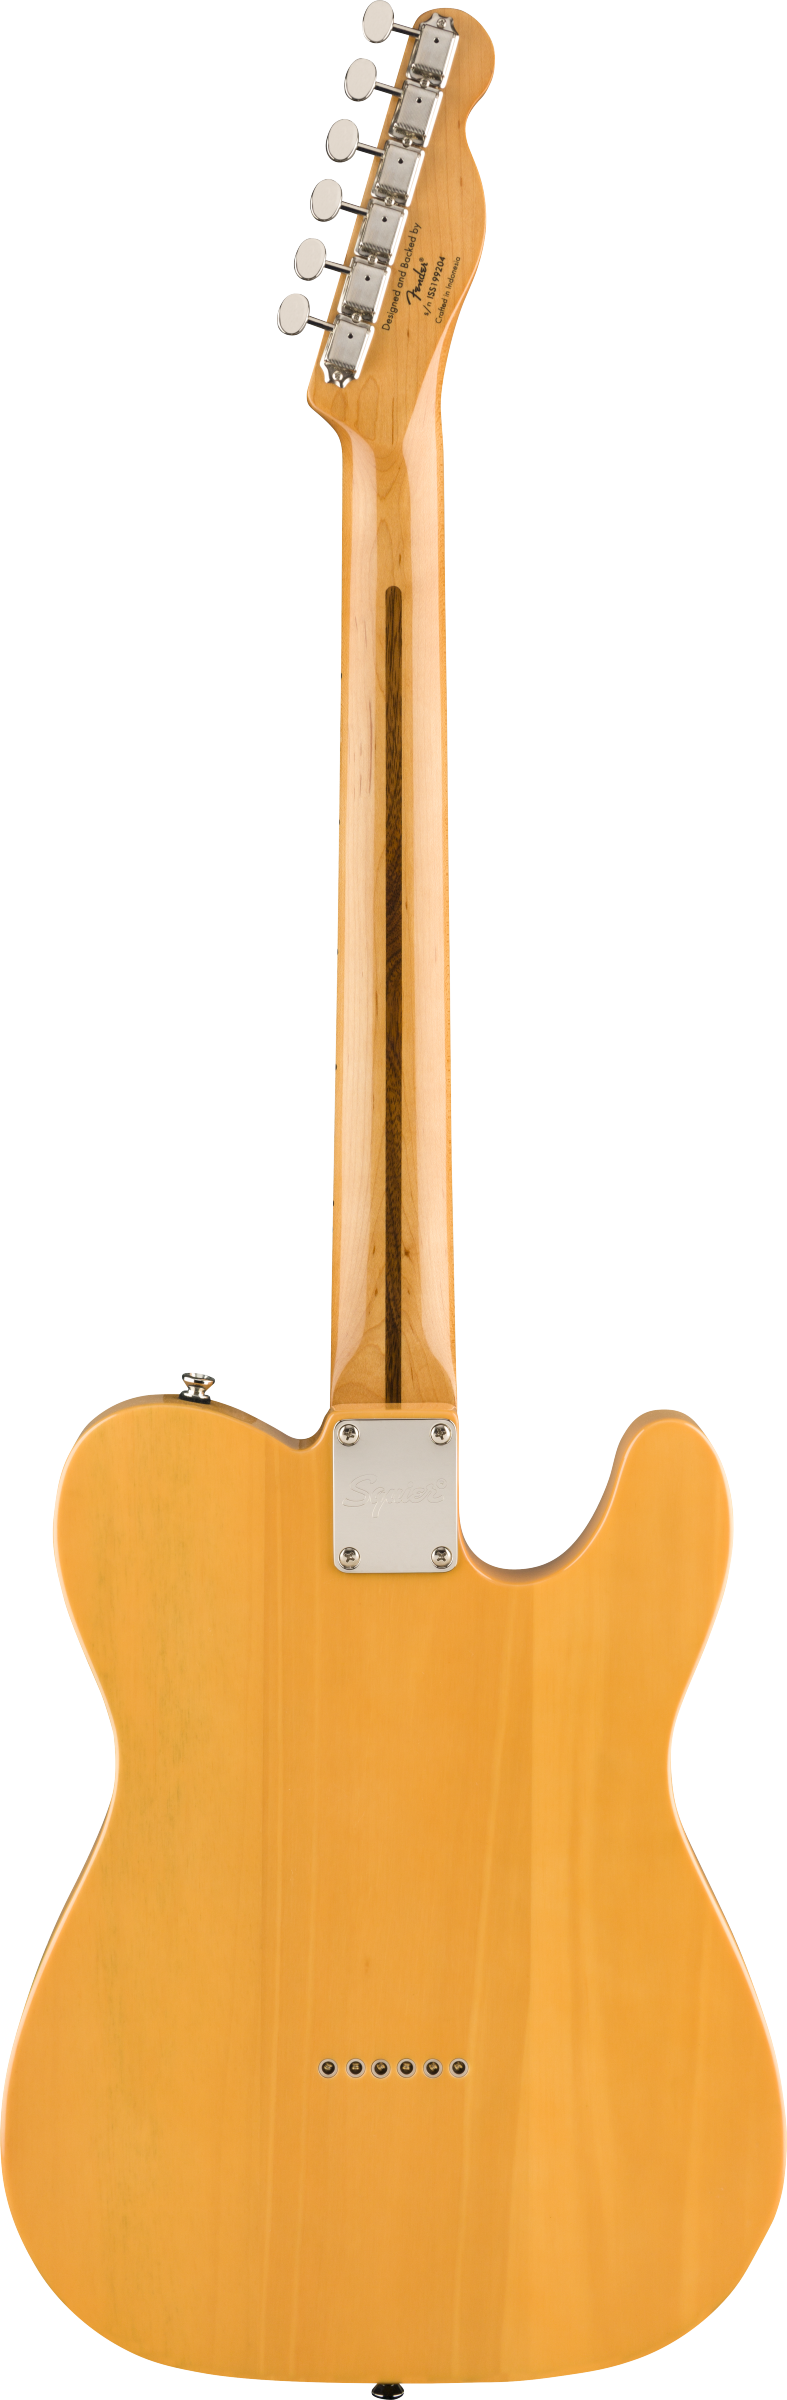 SQUIER CLASSIC VIBE TELECASTER '50s MN BUTTERSCOTCH BLONDE MANCINA